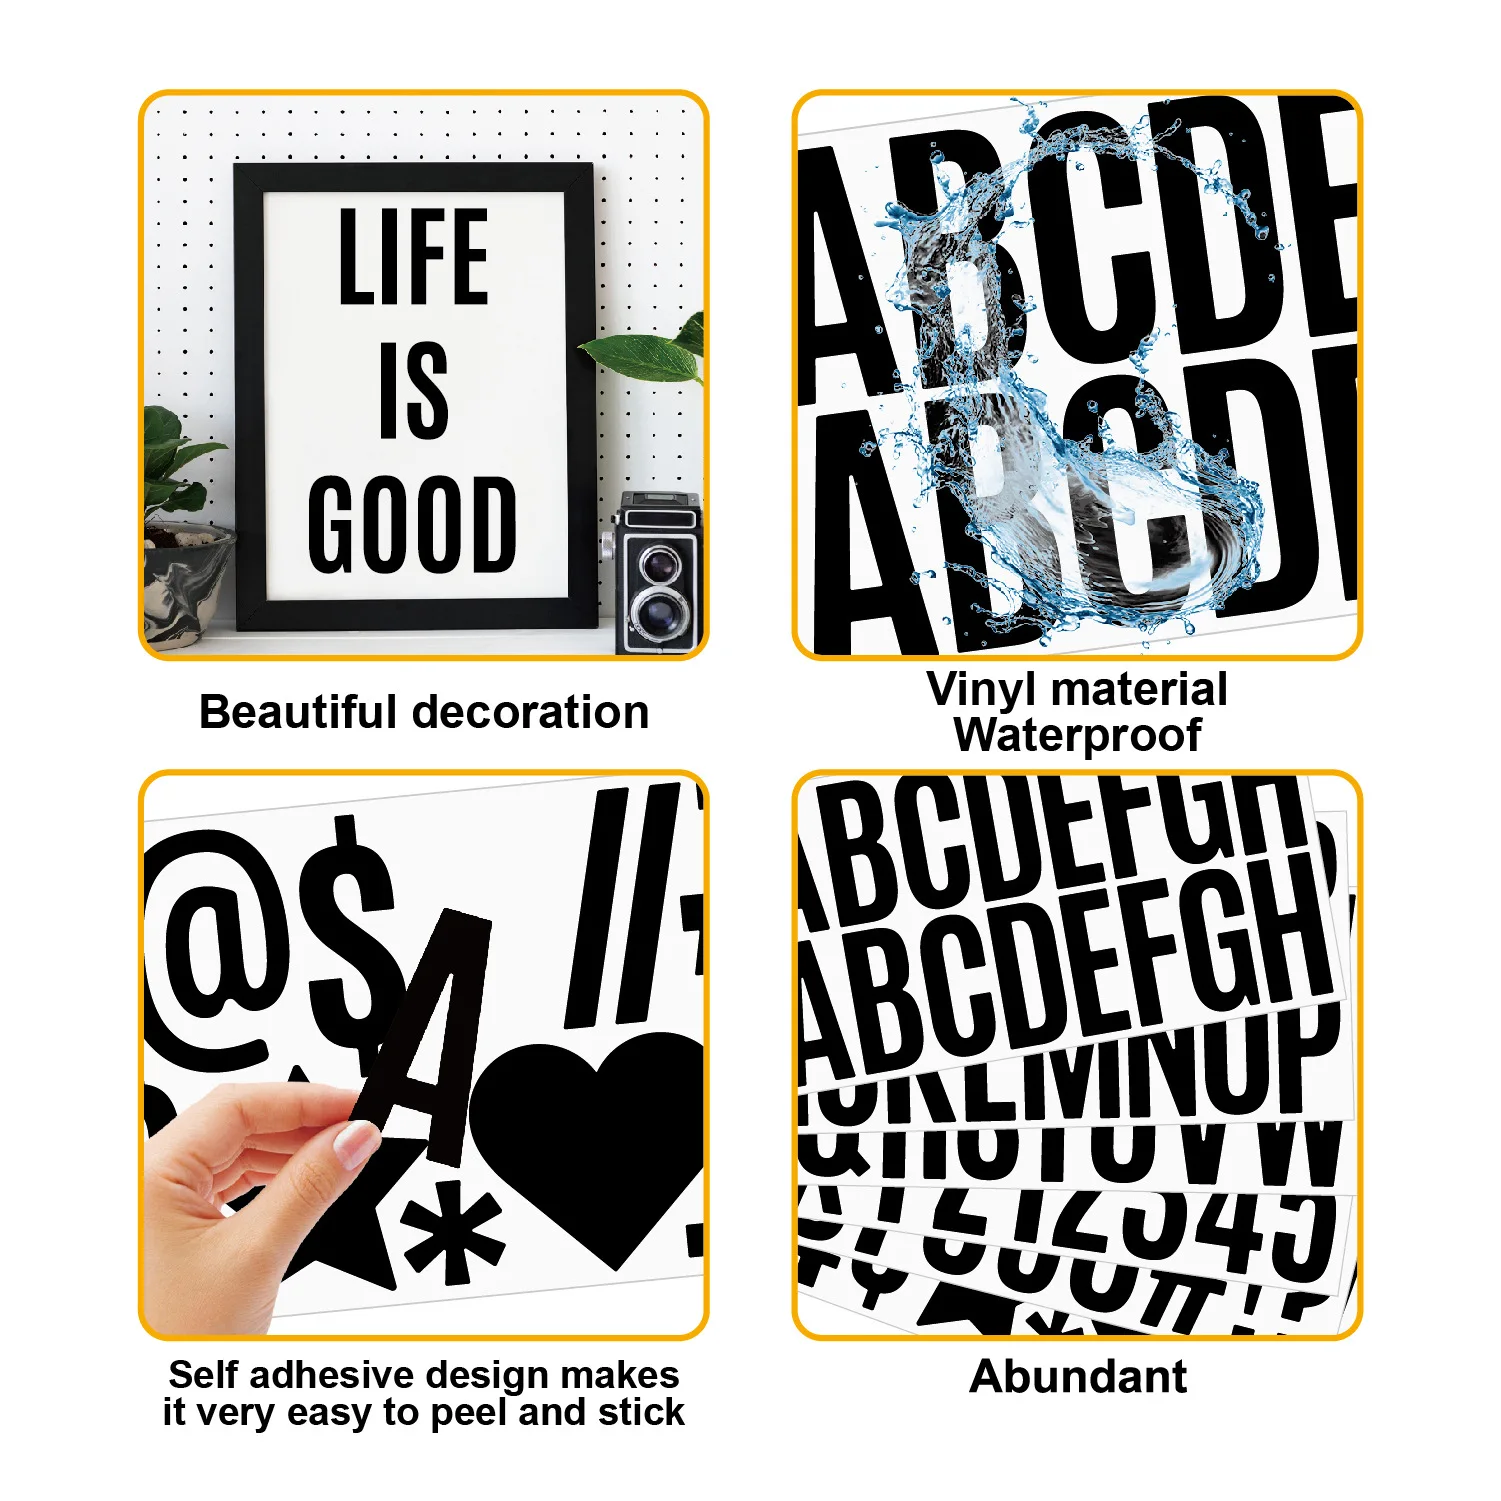 New Color Morandi Alphabet Letter Stickers 100 Pcs 6 Sheets 2.5 Inch Big  Letter Stickers DIY Book Diary Stationery Decor Sticker - AliExpress